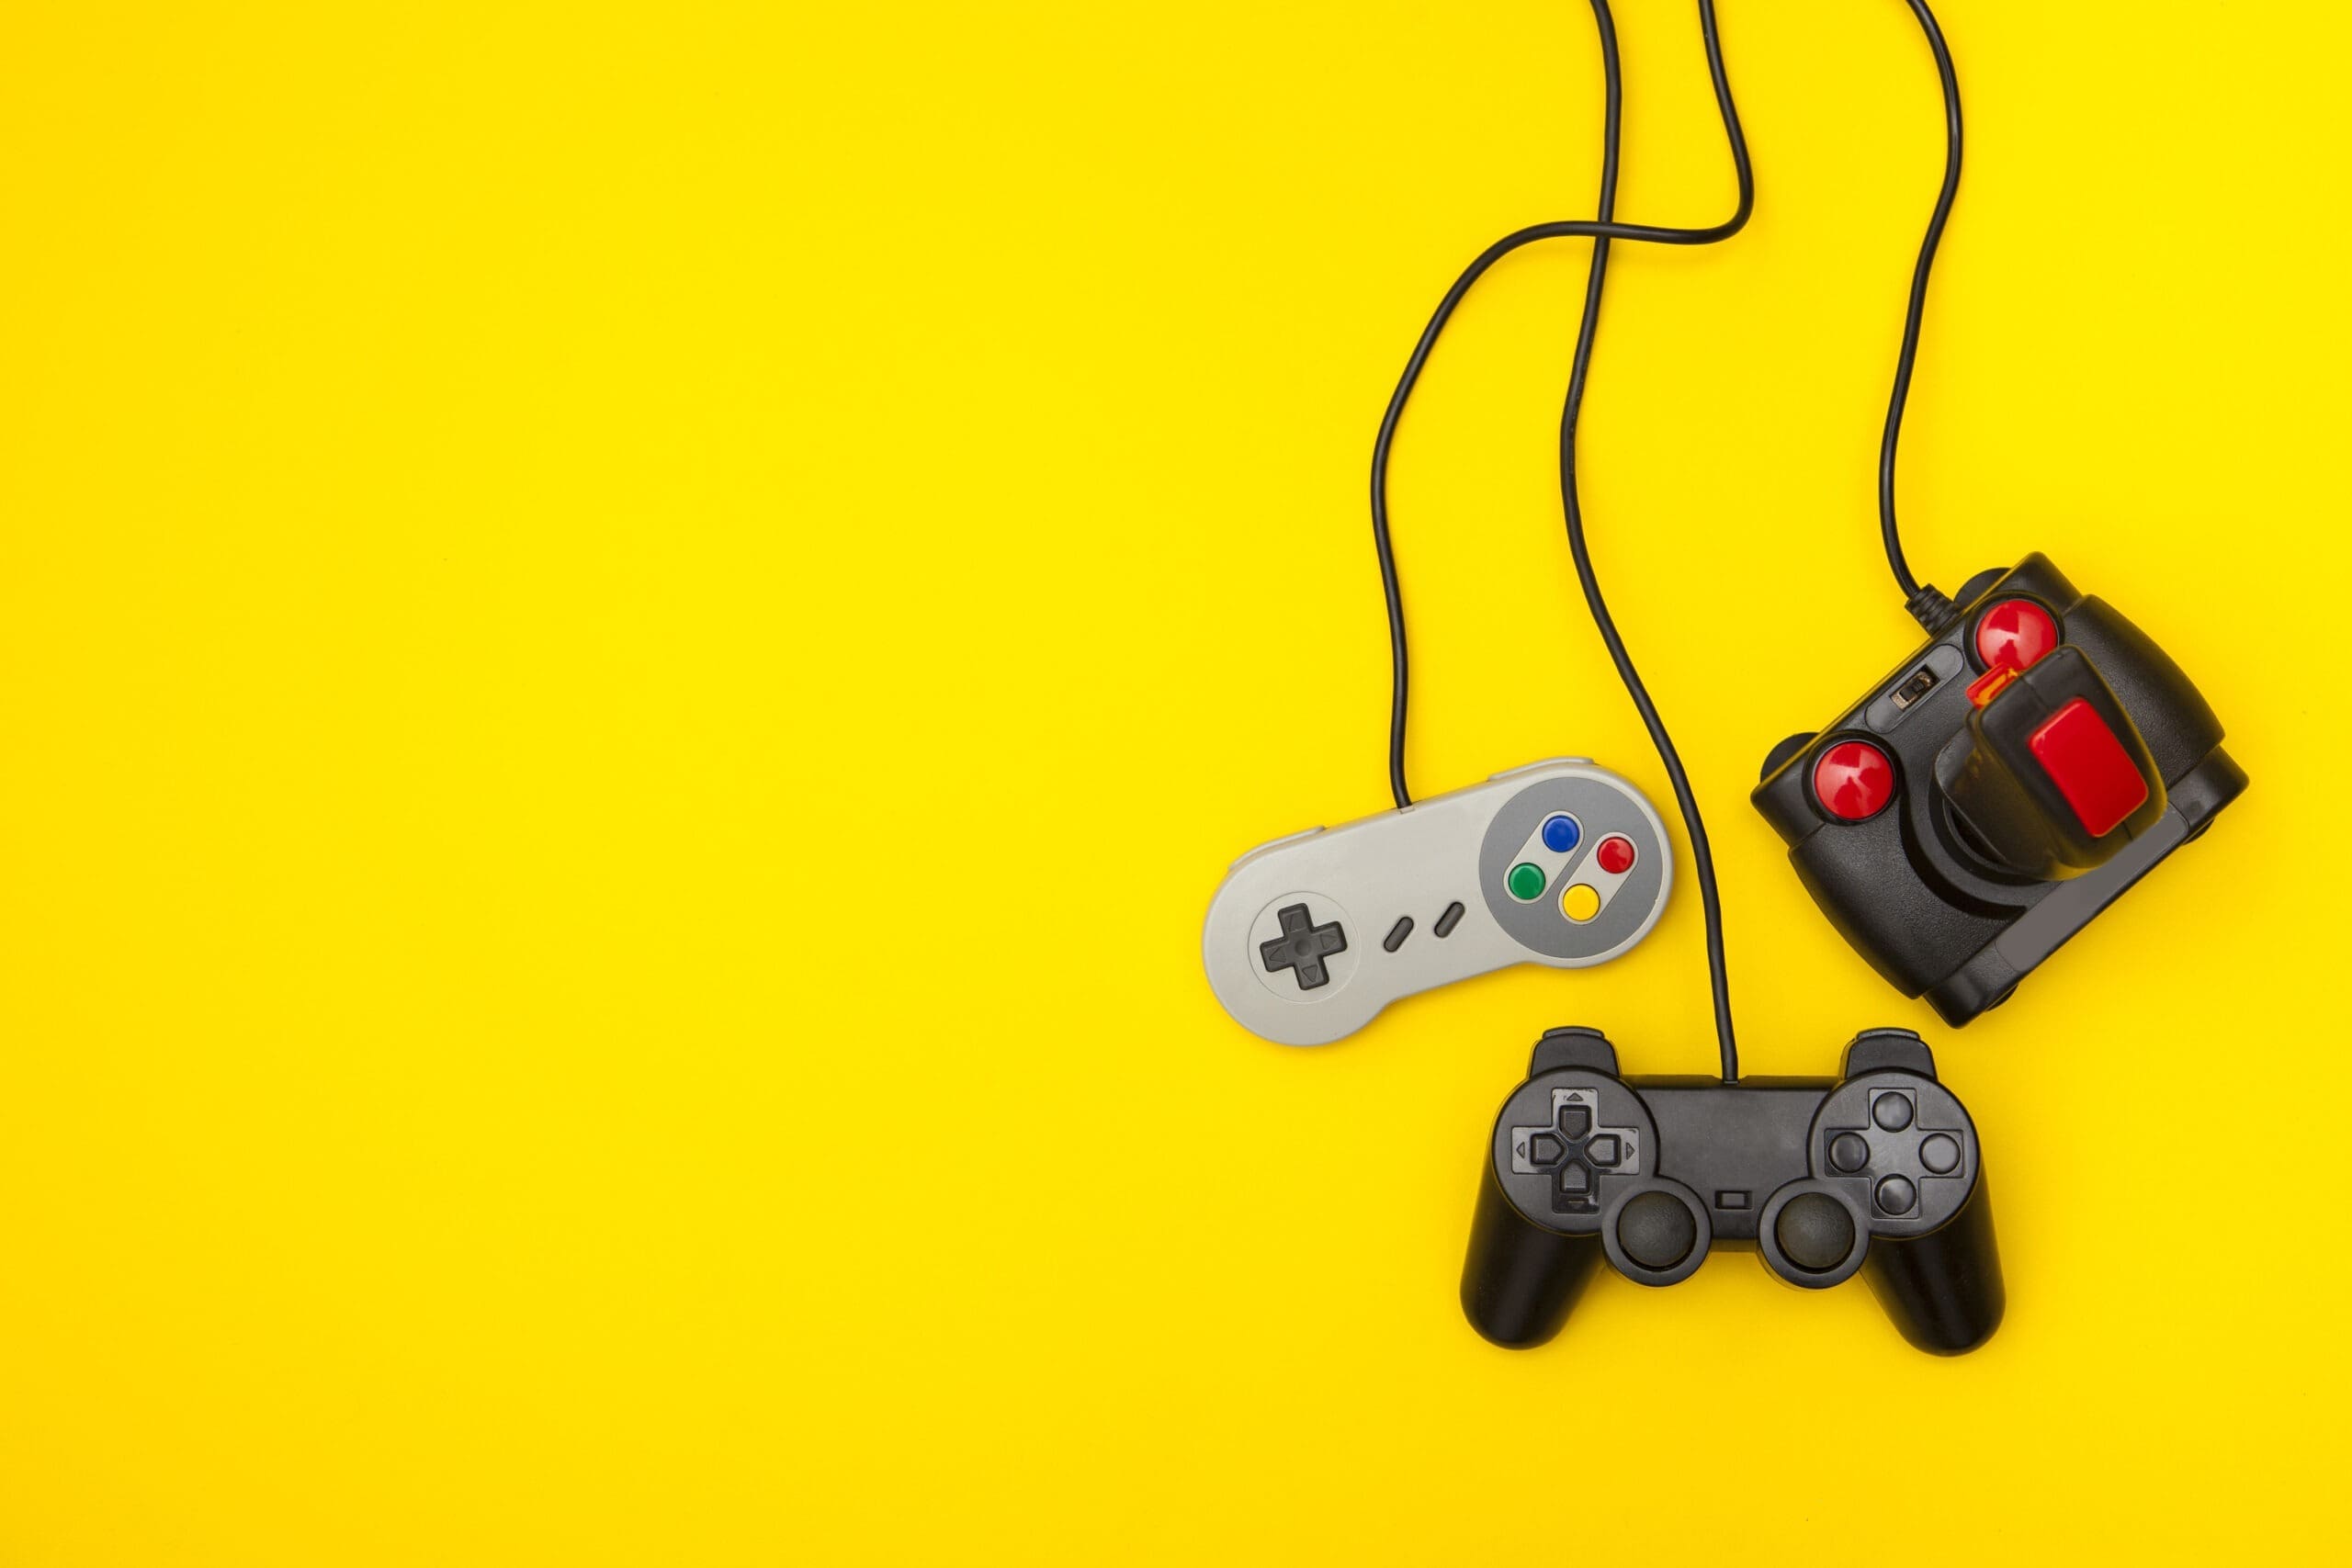 Video game addiction can be treated with psychotherapy